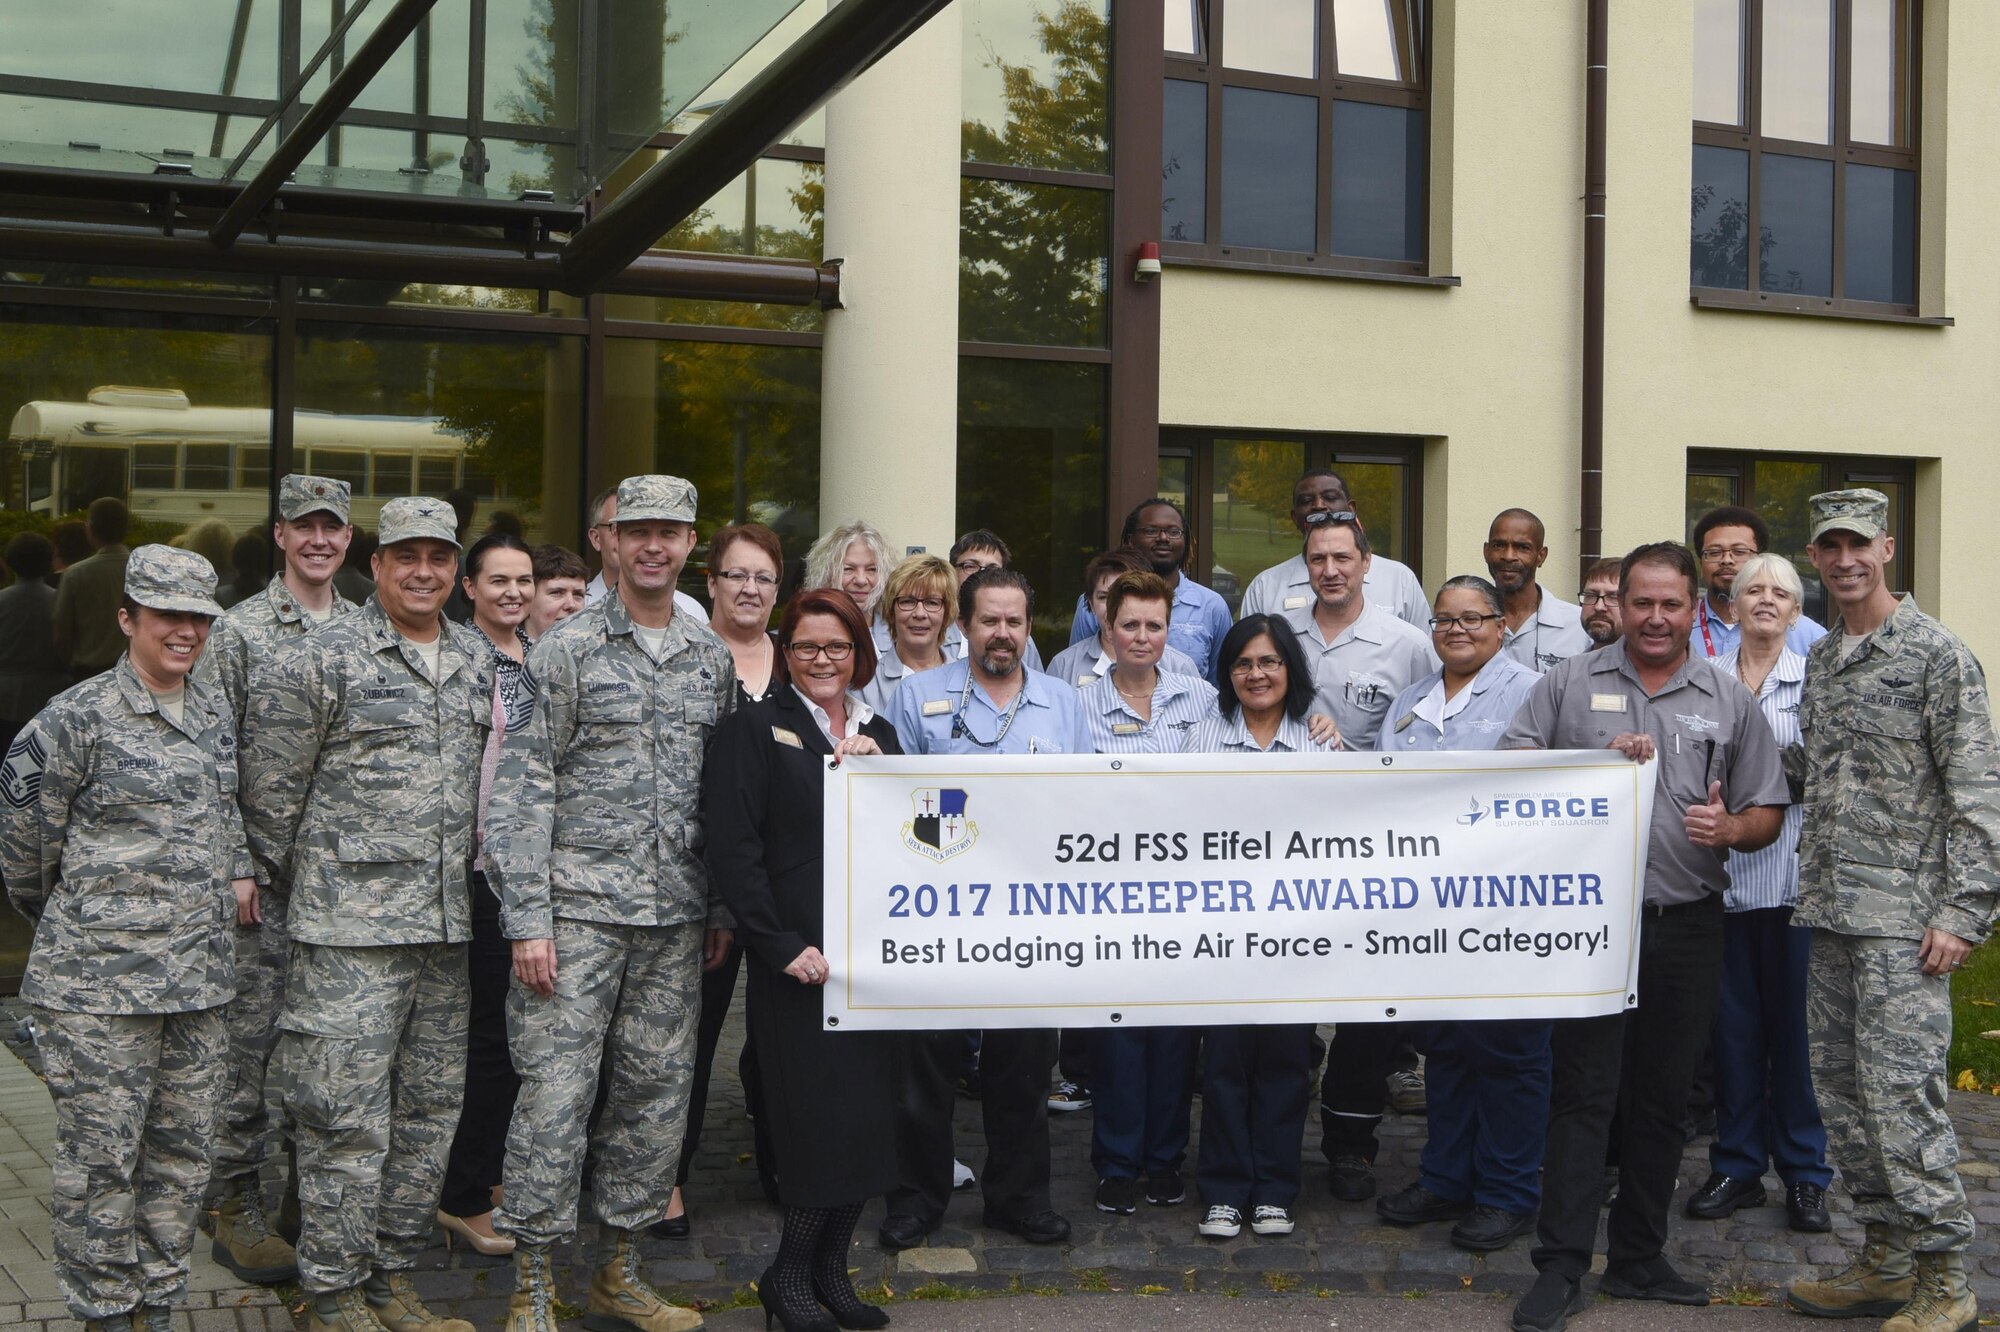 Col. Jason Bailey, 52nd Fighter Wing command, and Chief Master Sgt. Edwin Ludwigsen, 52nd FW command chief, pose with members of the Eifel Arms Inn at Spangdahlem Air Base, Germany, September 26, 2017. The Eifel Arms Inn celebrated its fifth win as the Best Lodging in the Air Force - Small Category. (U.S. Air Force photo by Senior Airman Dawn M. Weber)